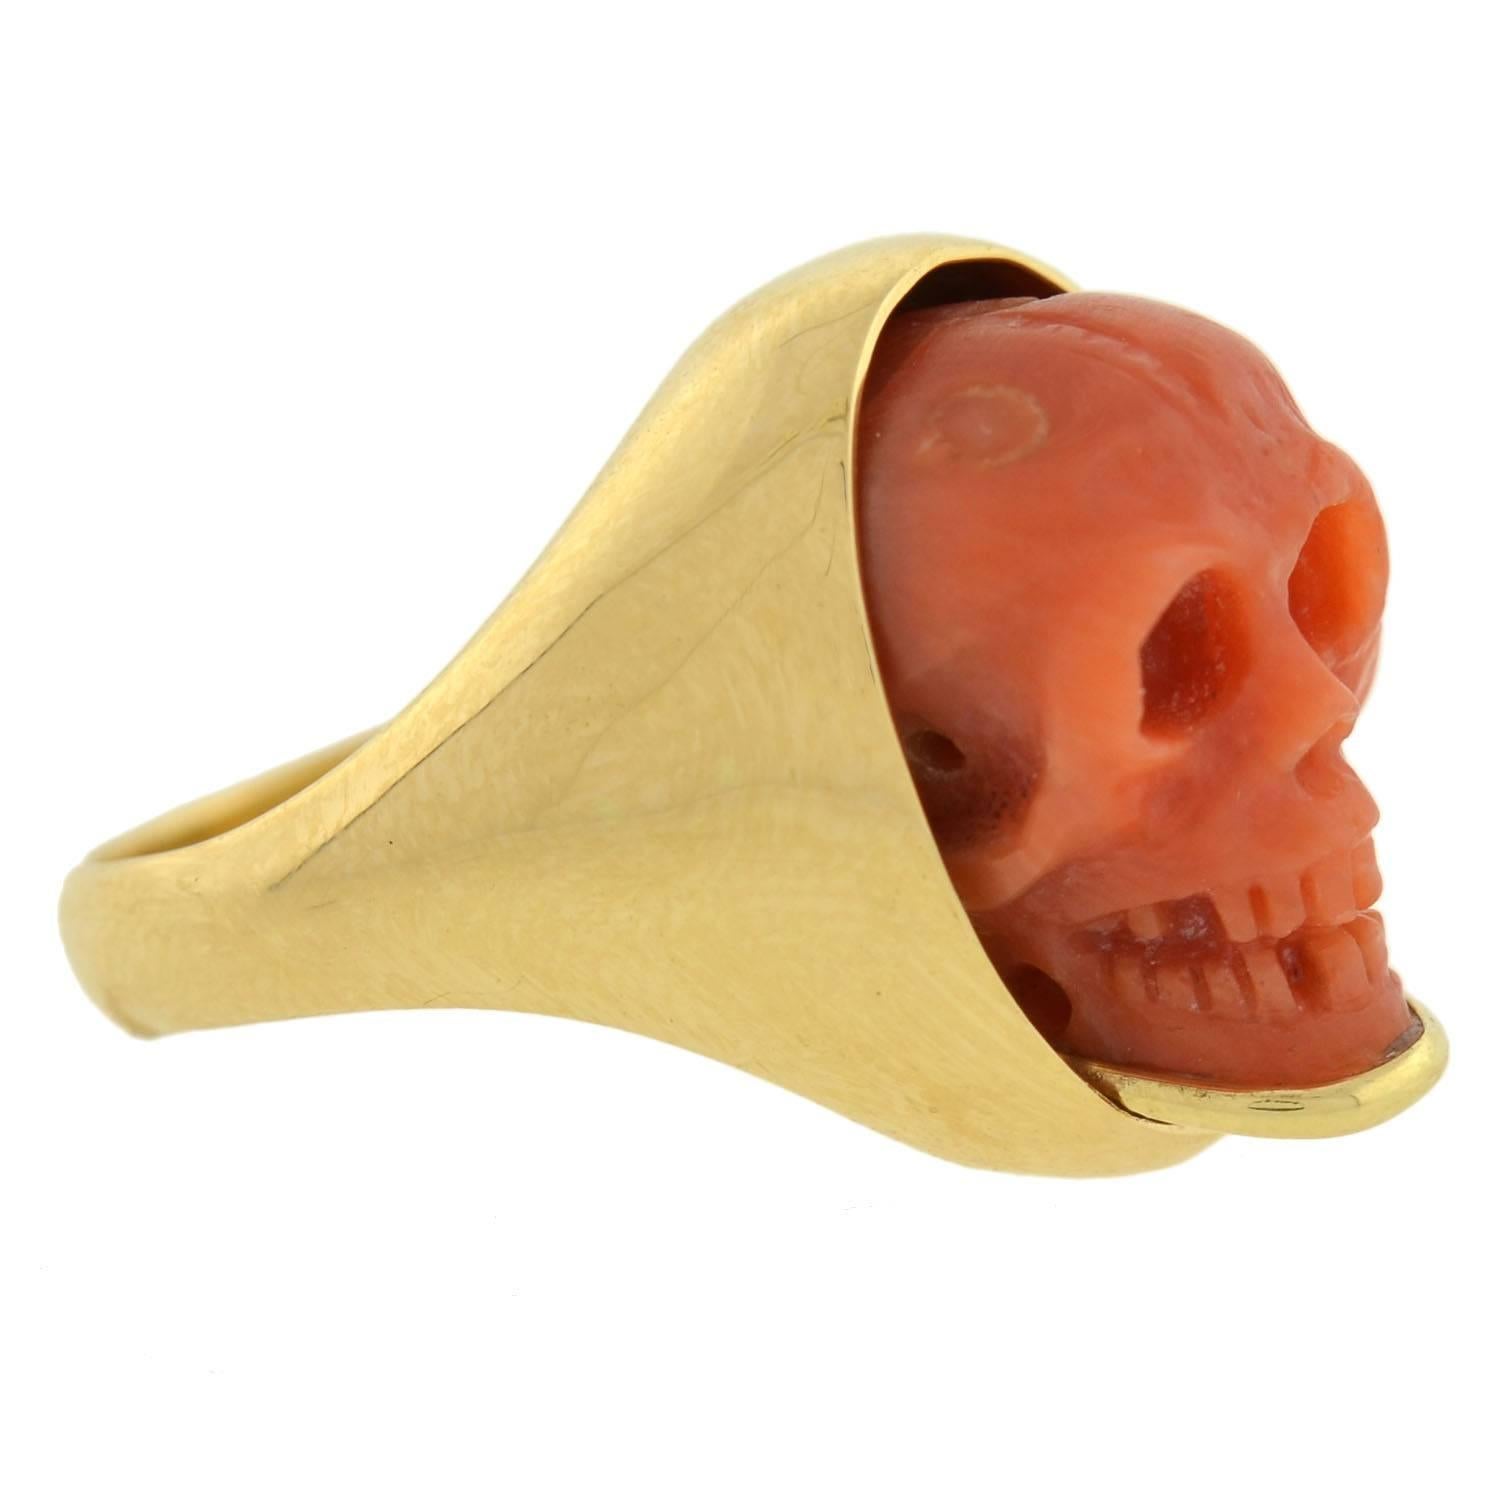 This fabulous ring pairs a Victorian (ca1880) era coral skull with a handmade 18kt gold setting, creating a fantastic compilation piece! The natural coral is meticulously hand carved, creating a detailed miniature replica of a human skull. The